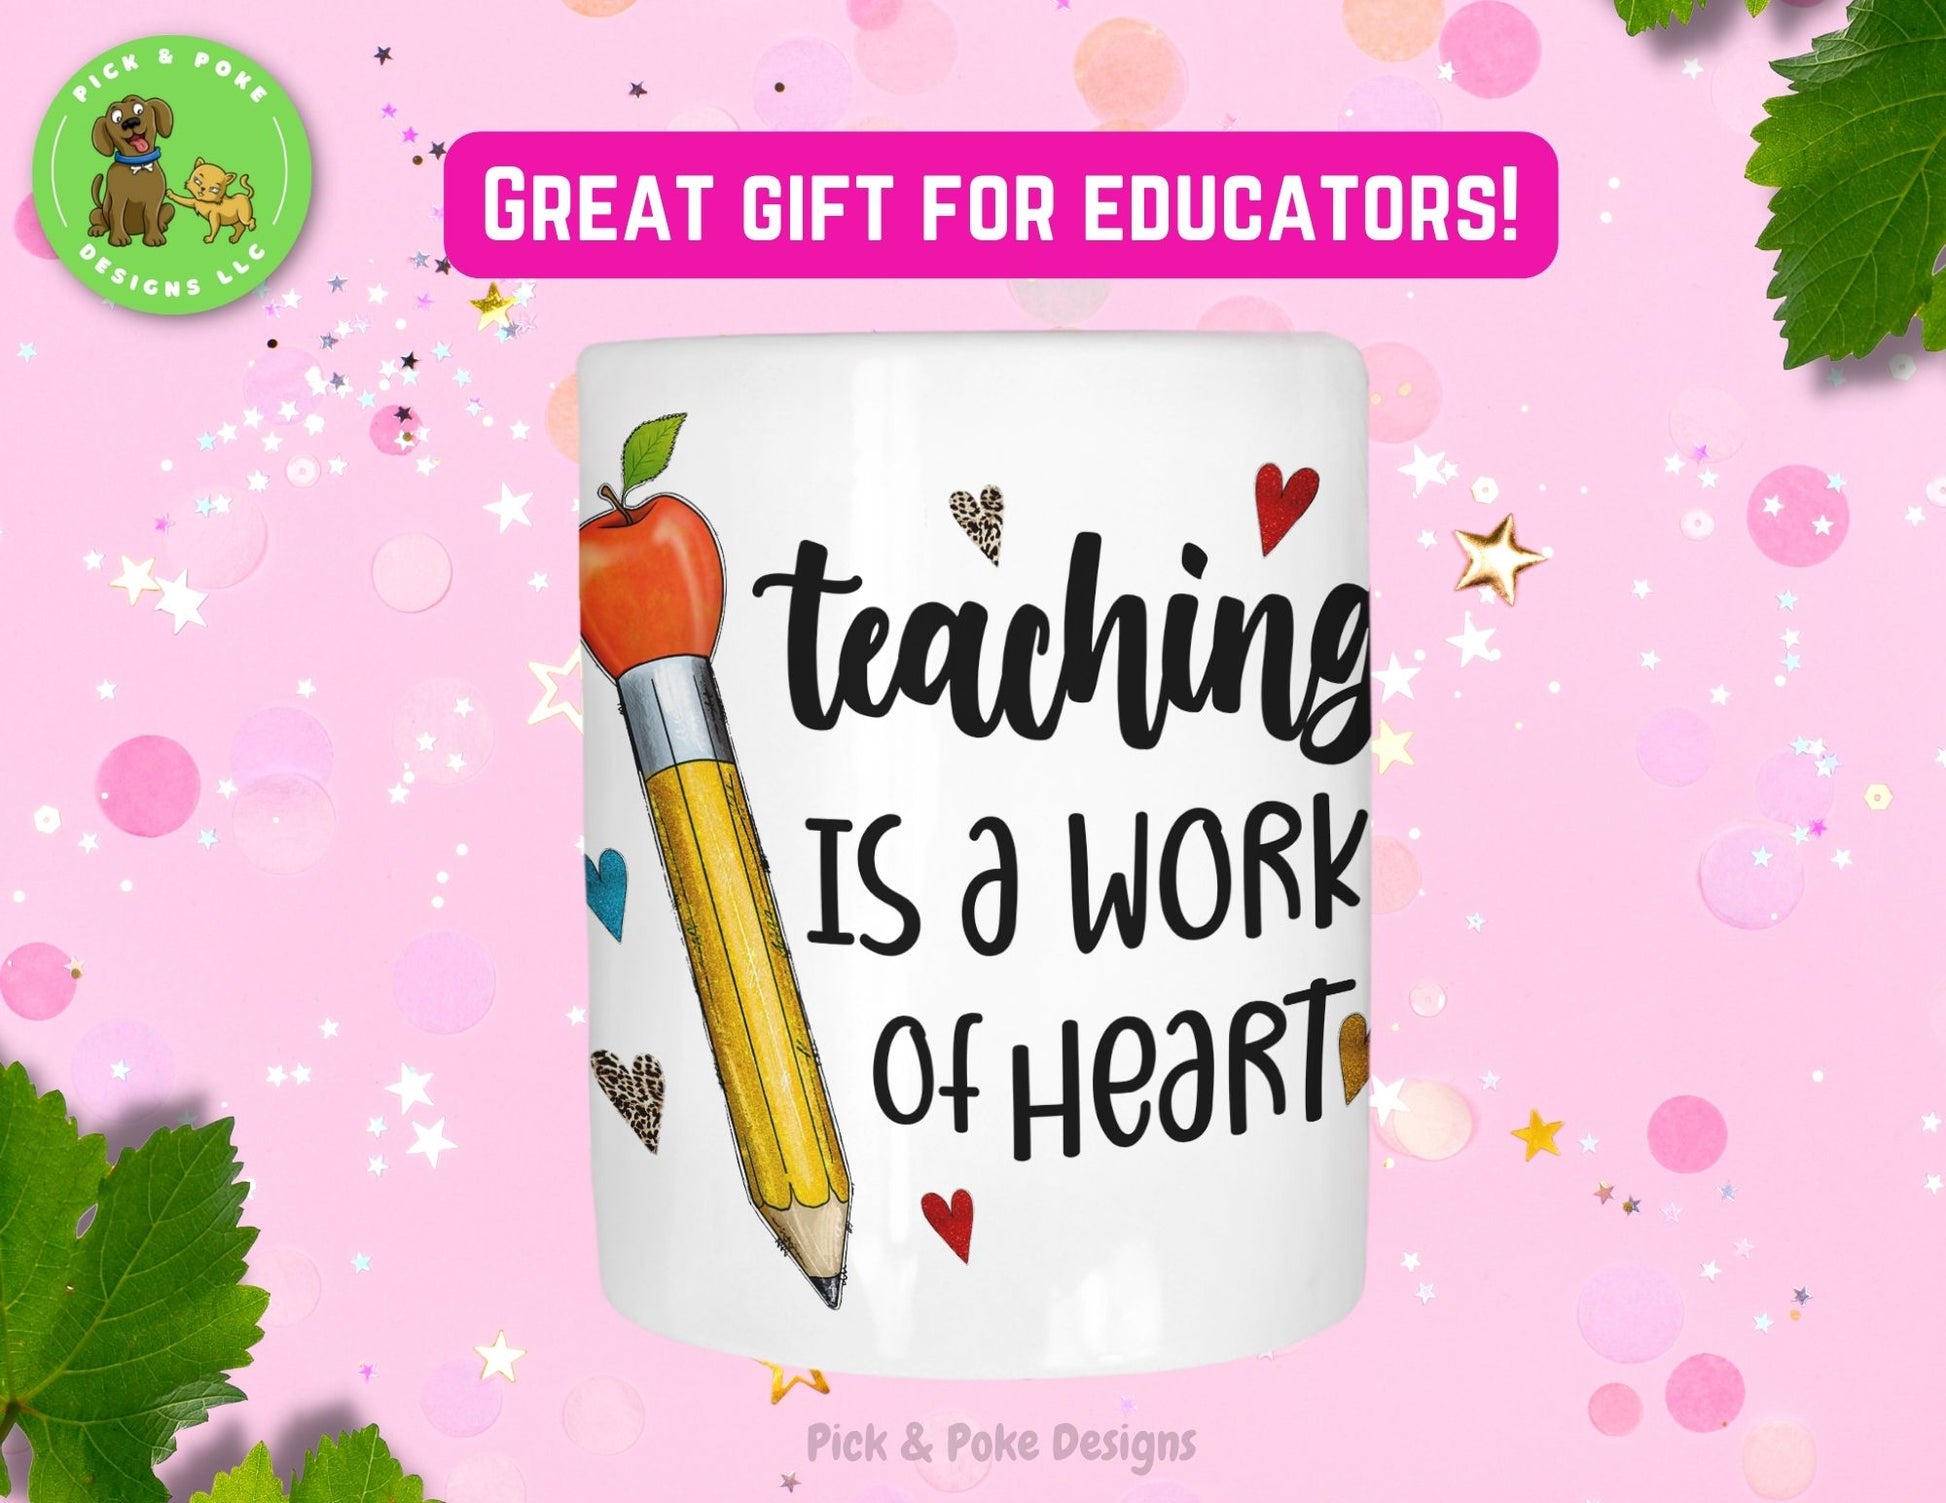 Teaching is a Work of Heart ceramic pencil holder is personalized with your name written in a hand lettering font